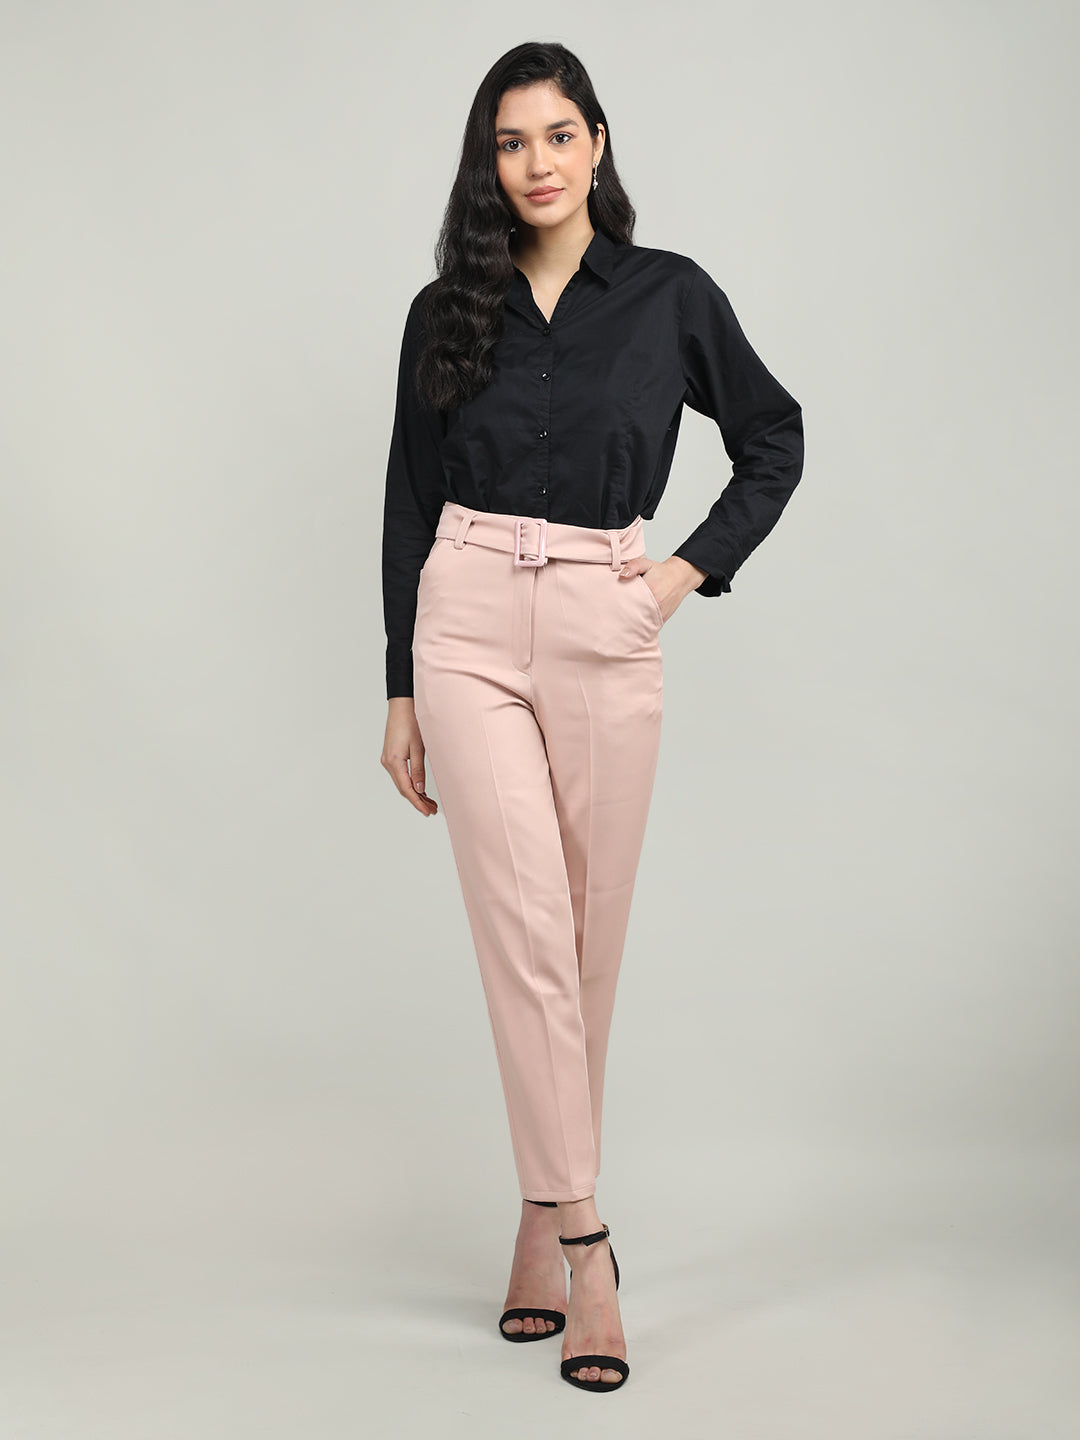 SMIDOW Dress Pants Women High Waisted Straight Leg Regular Fit Bootcut  Business Work Office Pant with Pockets at Amazon Women's Clothing store